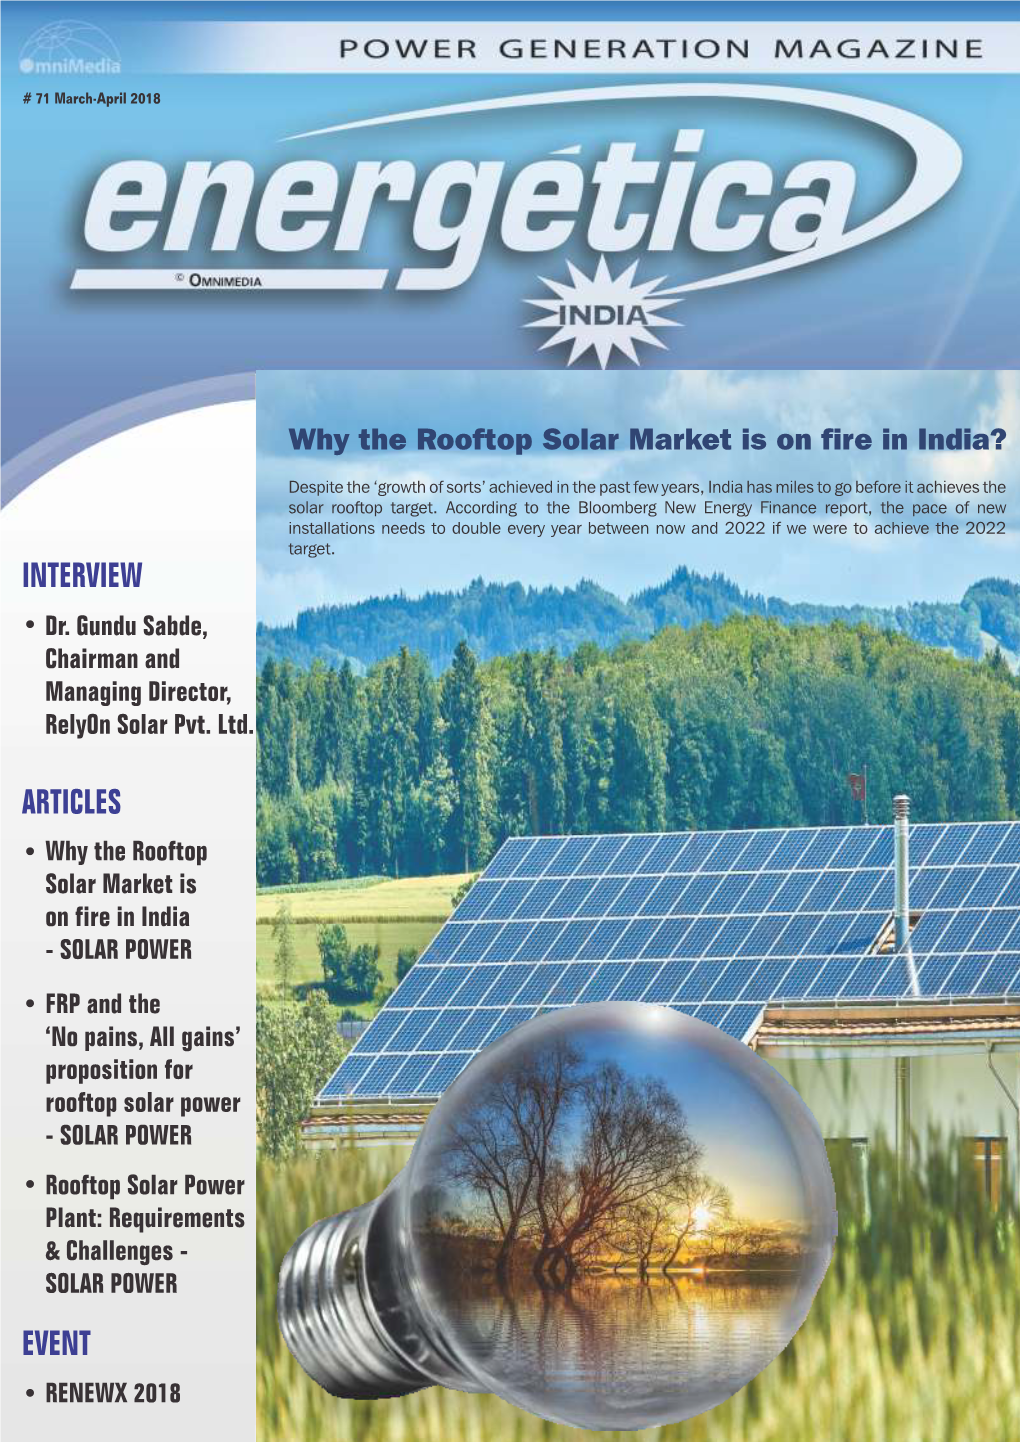 Why the Rooftop Solar Market Is on Fire in India?